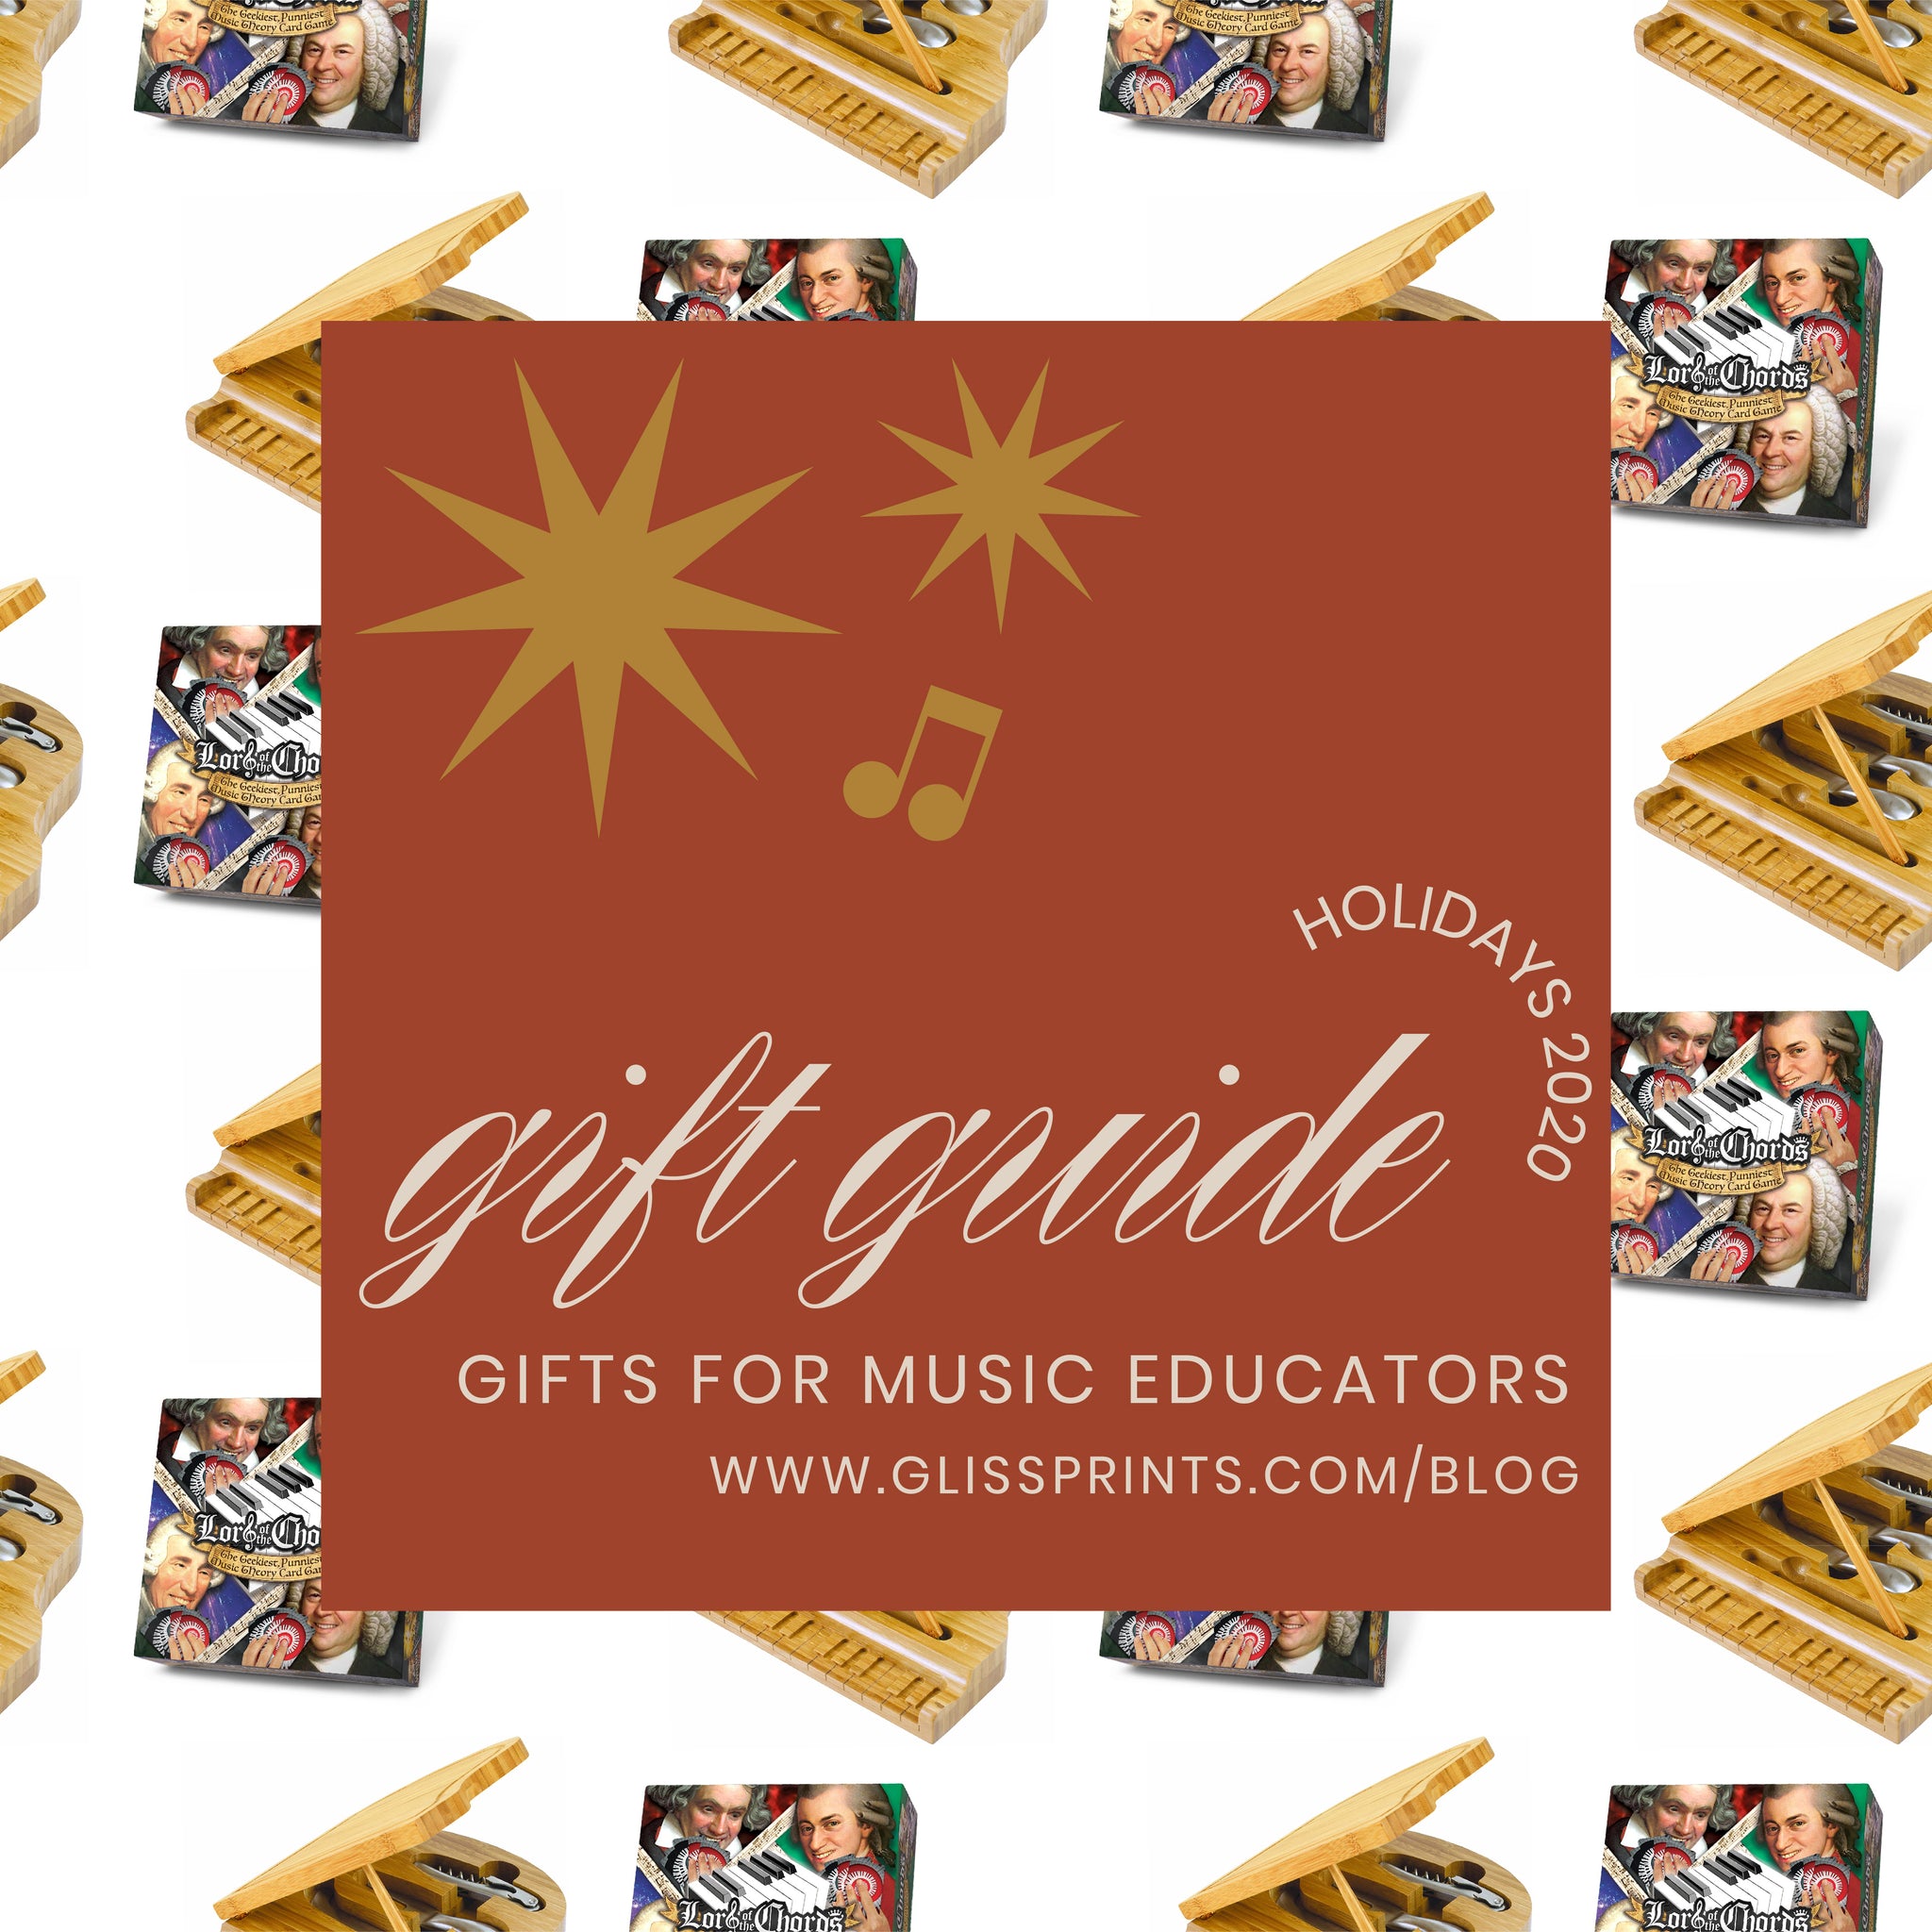 Gifts for Music Educators! Holiday Gift Guide 2020